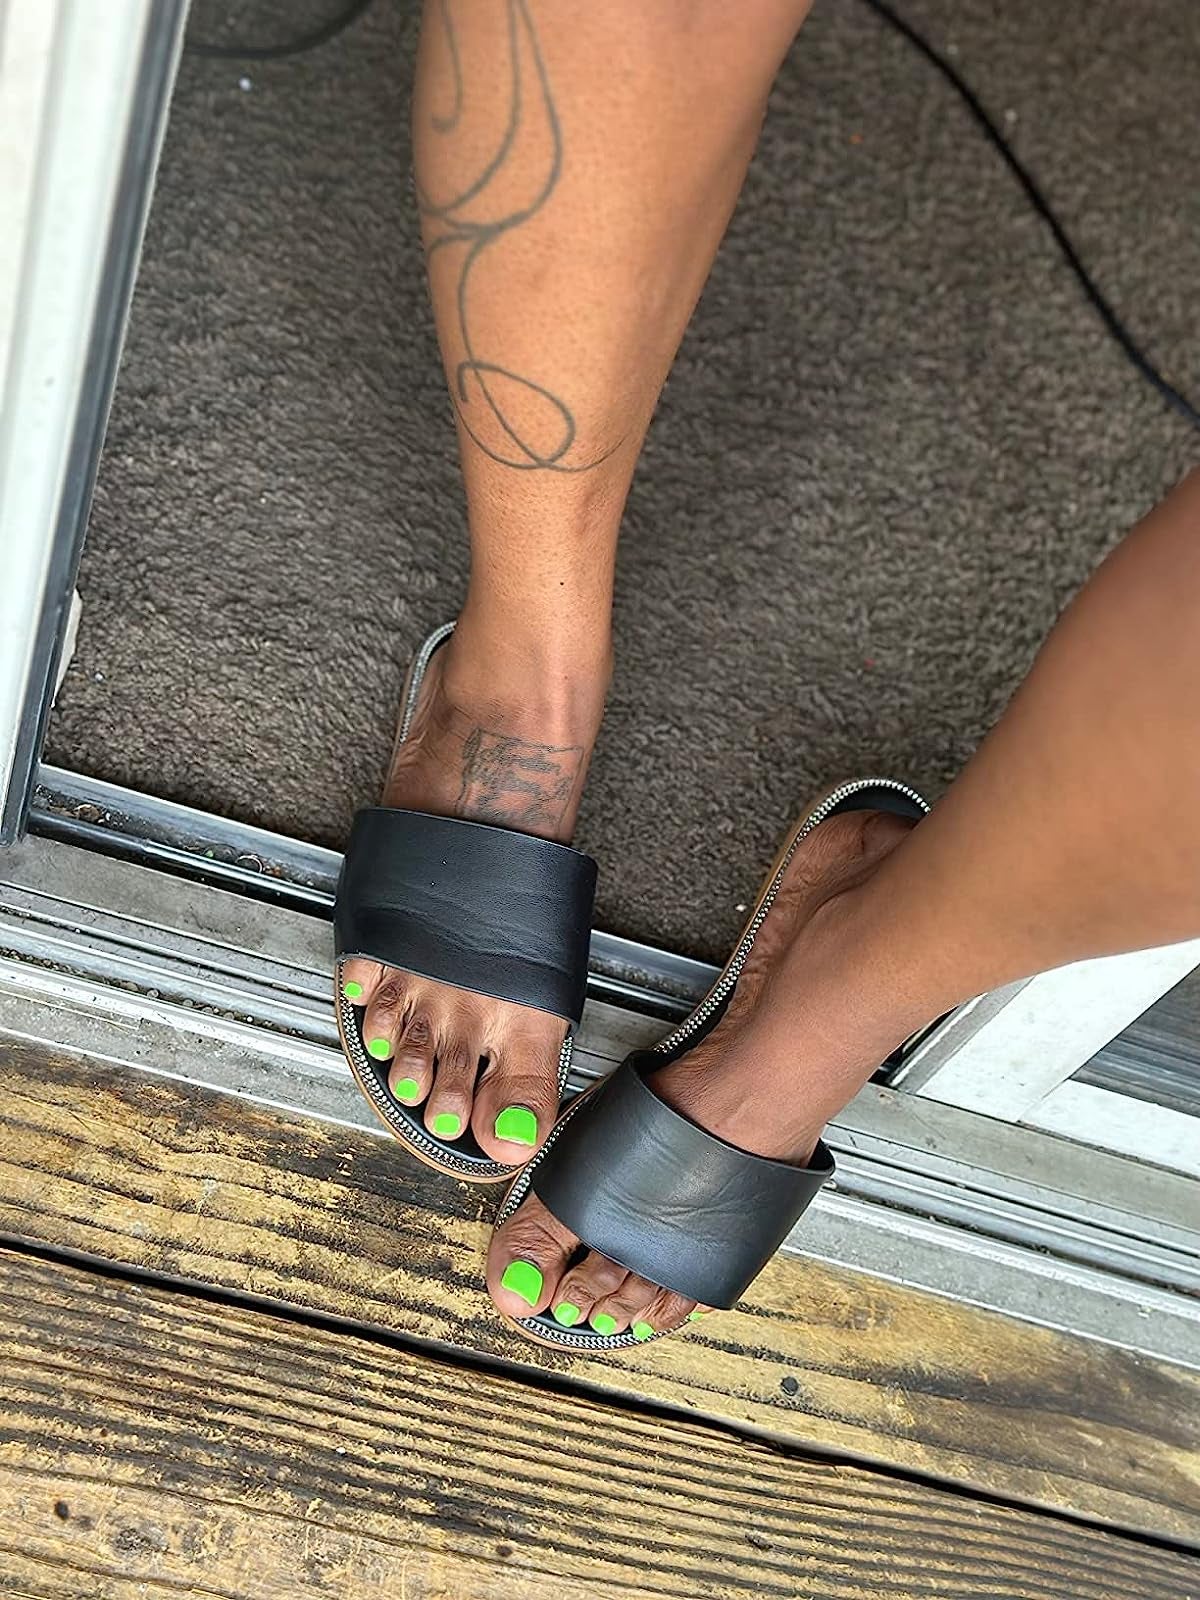 reviewer in sandals with press on toenails that look like regular painted toenails